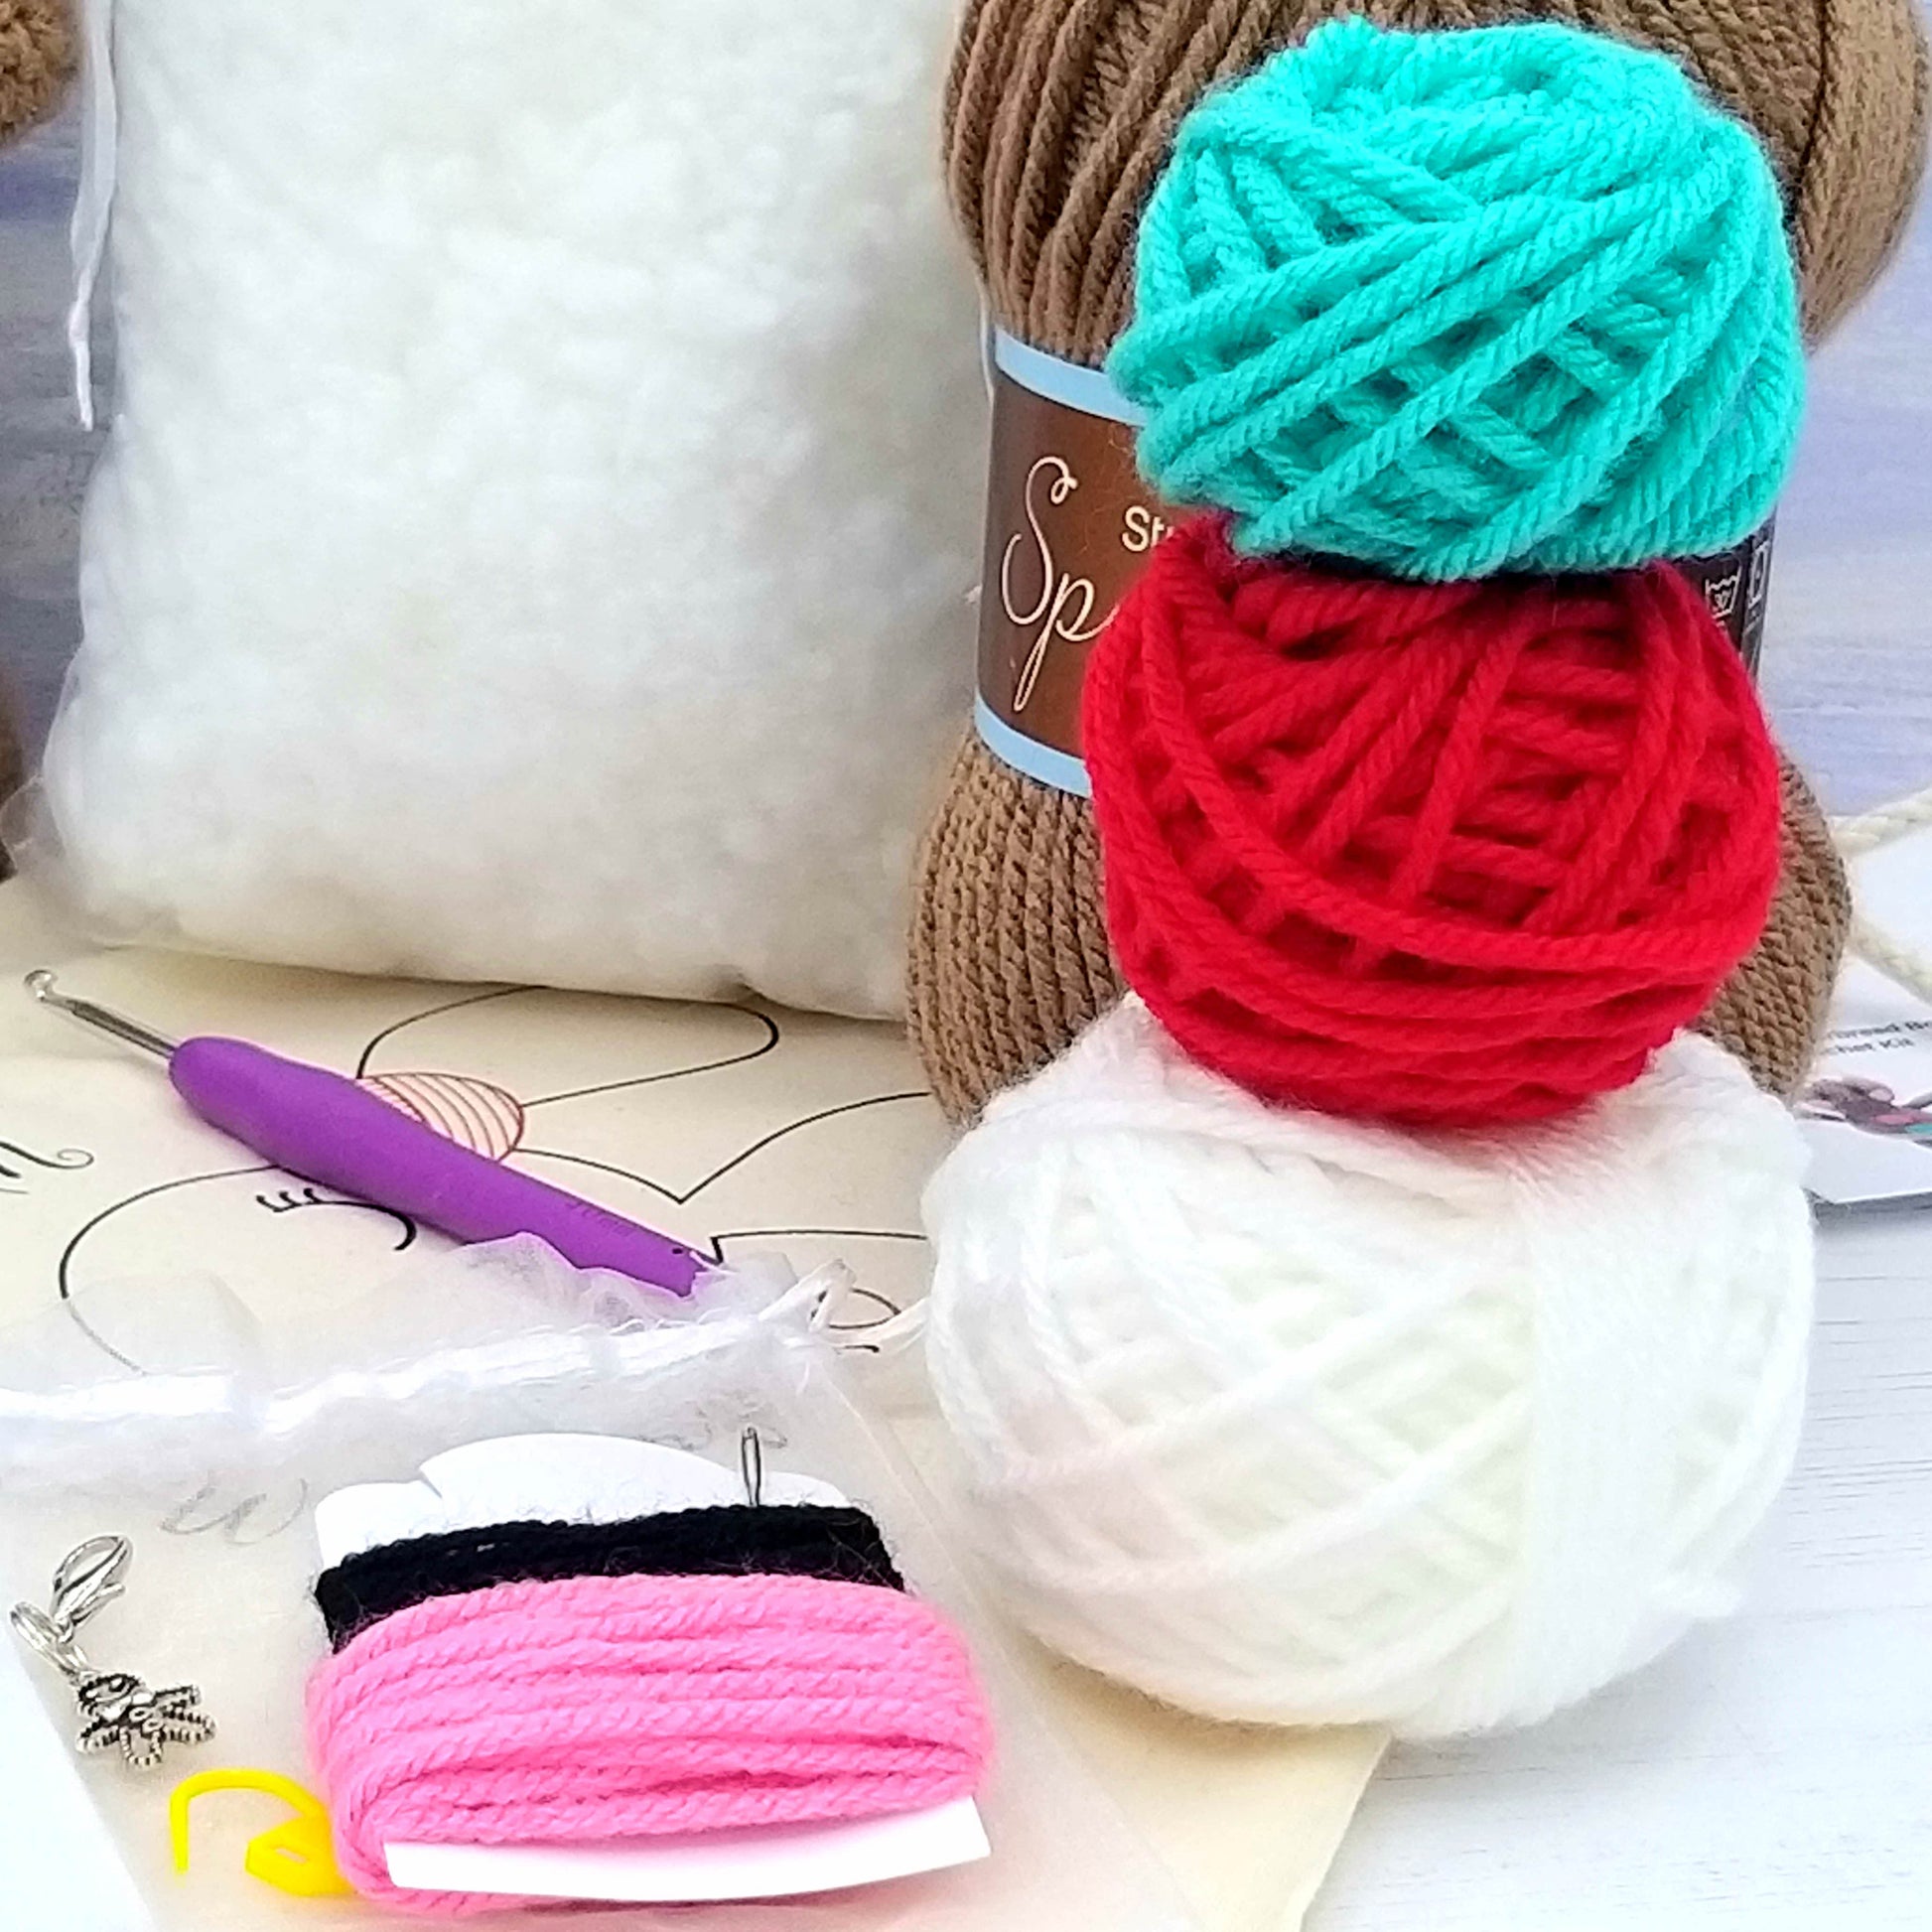 Balls of yarn used in kit - white, brown, red and blue